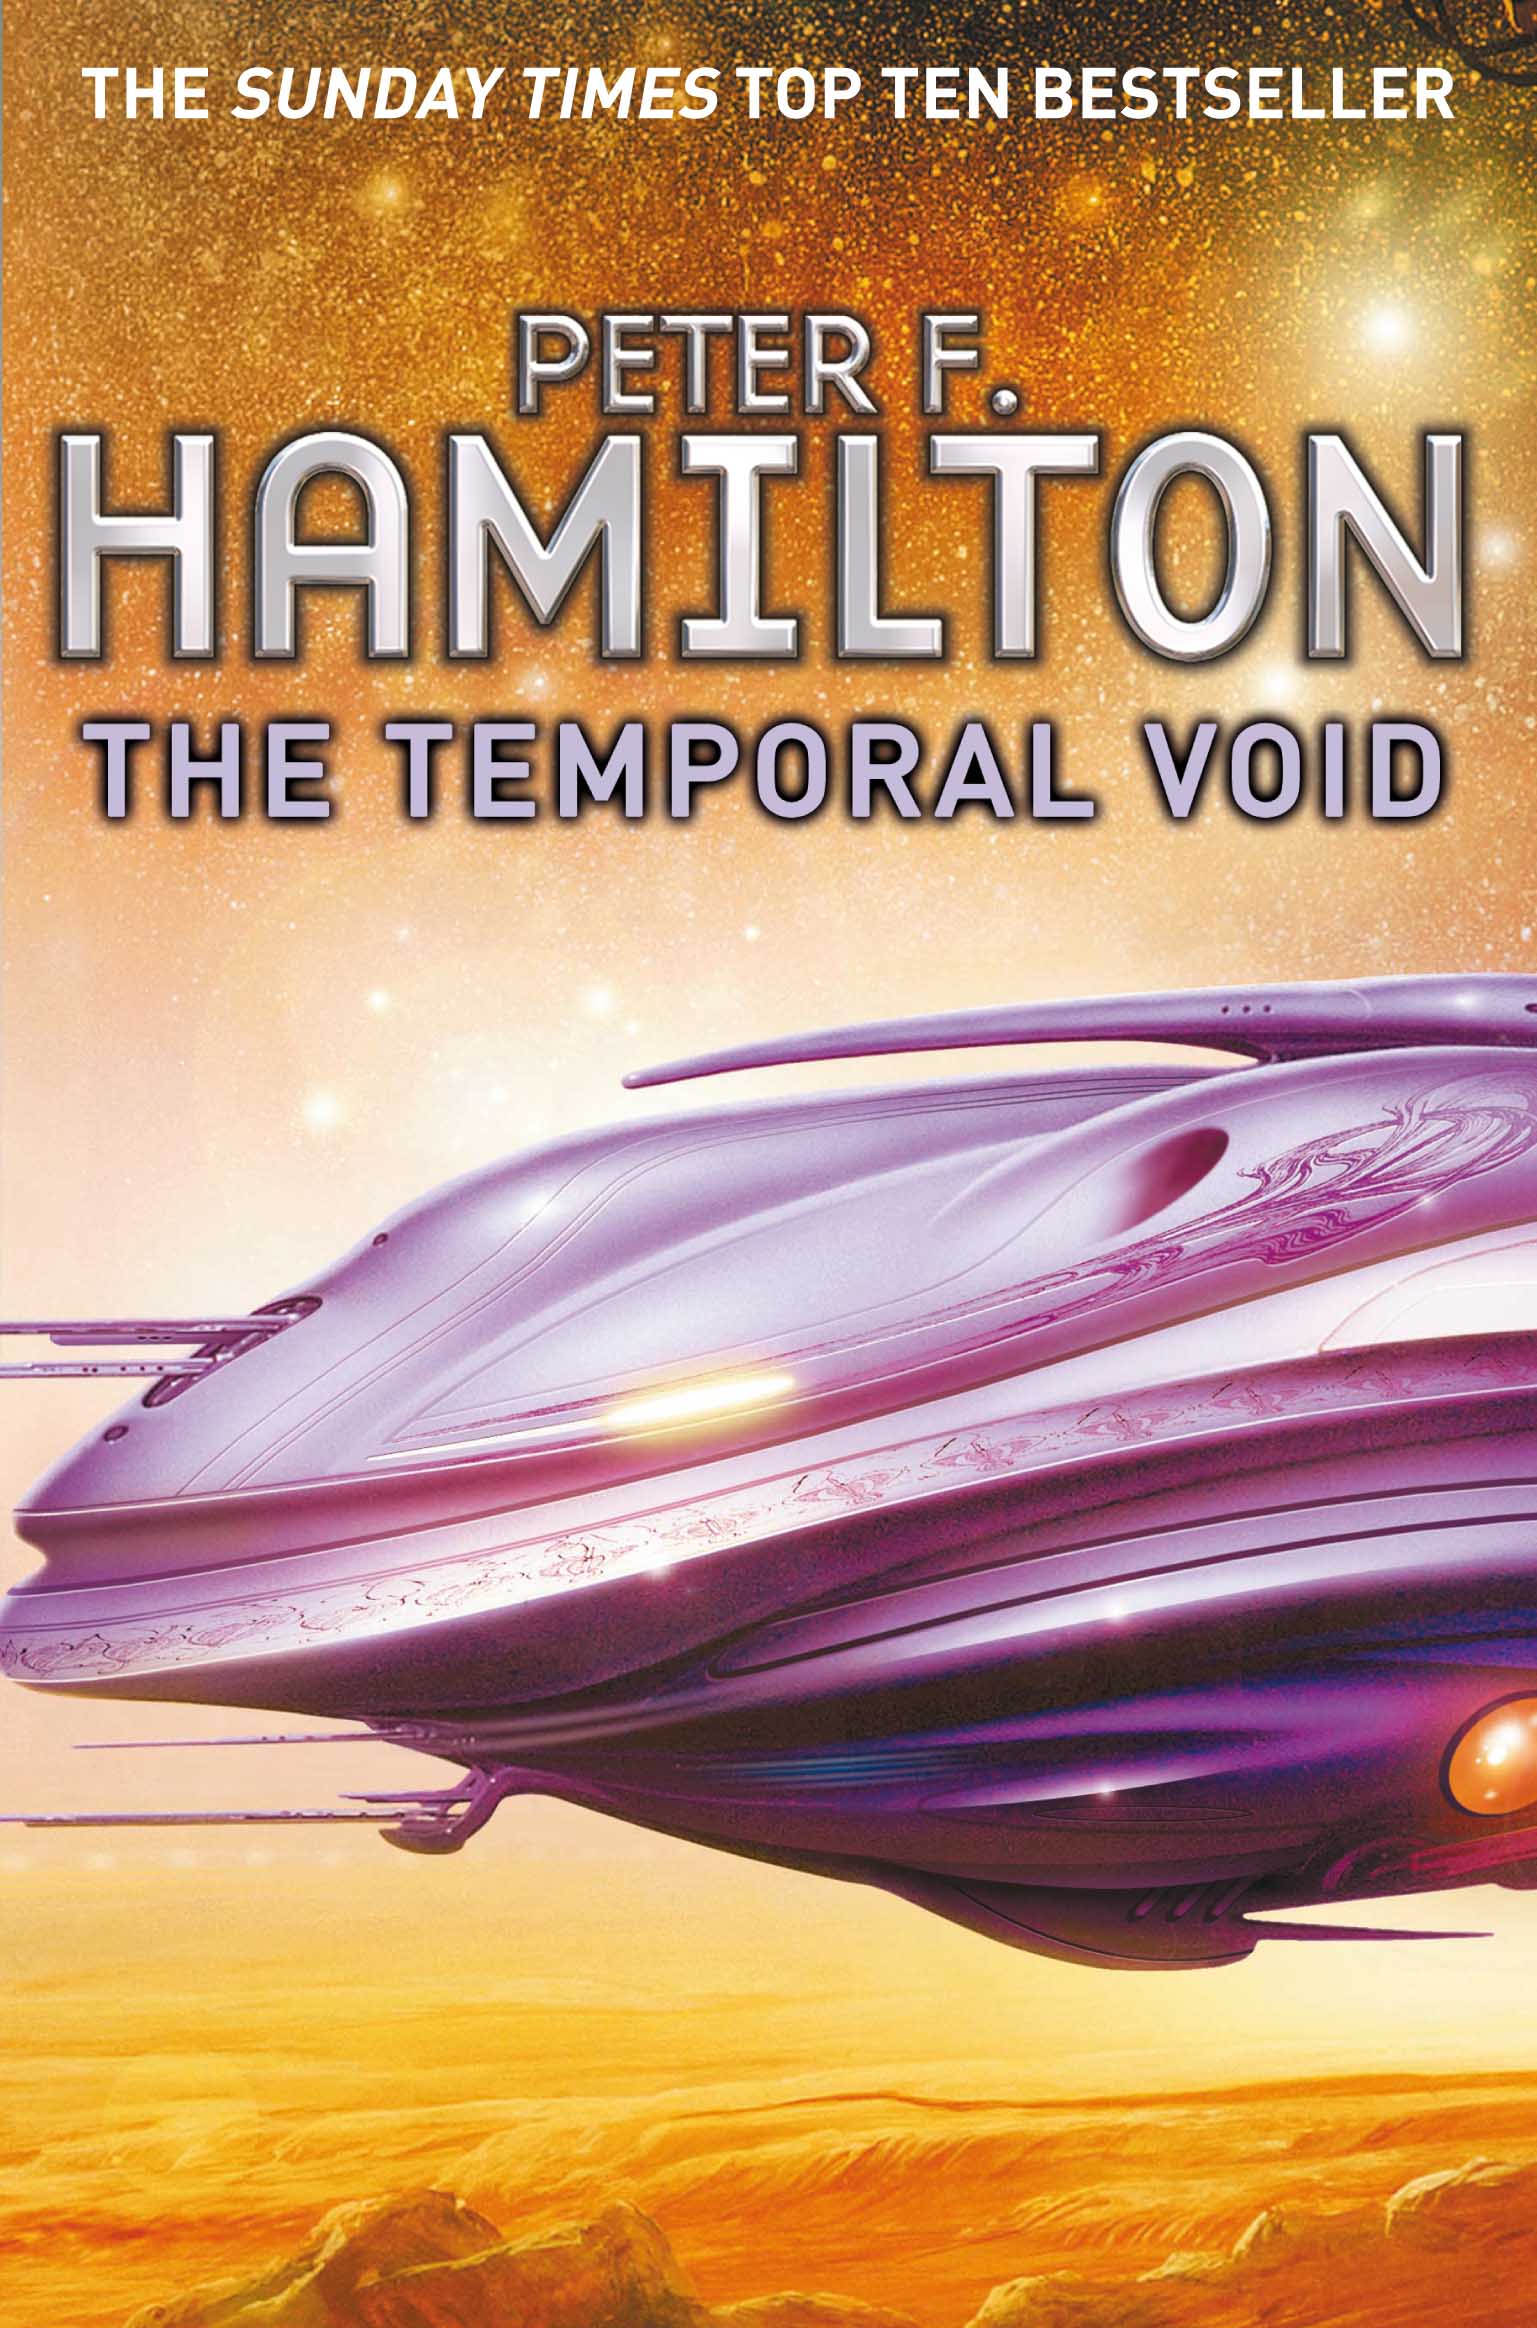 An interview with Peter F. Hamilton 